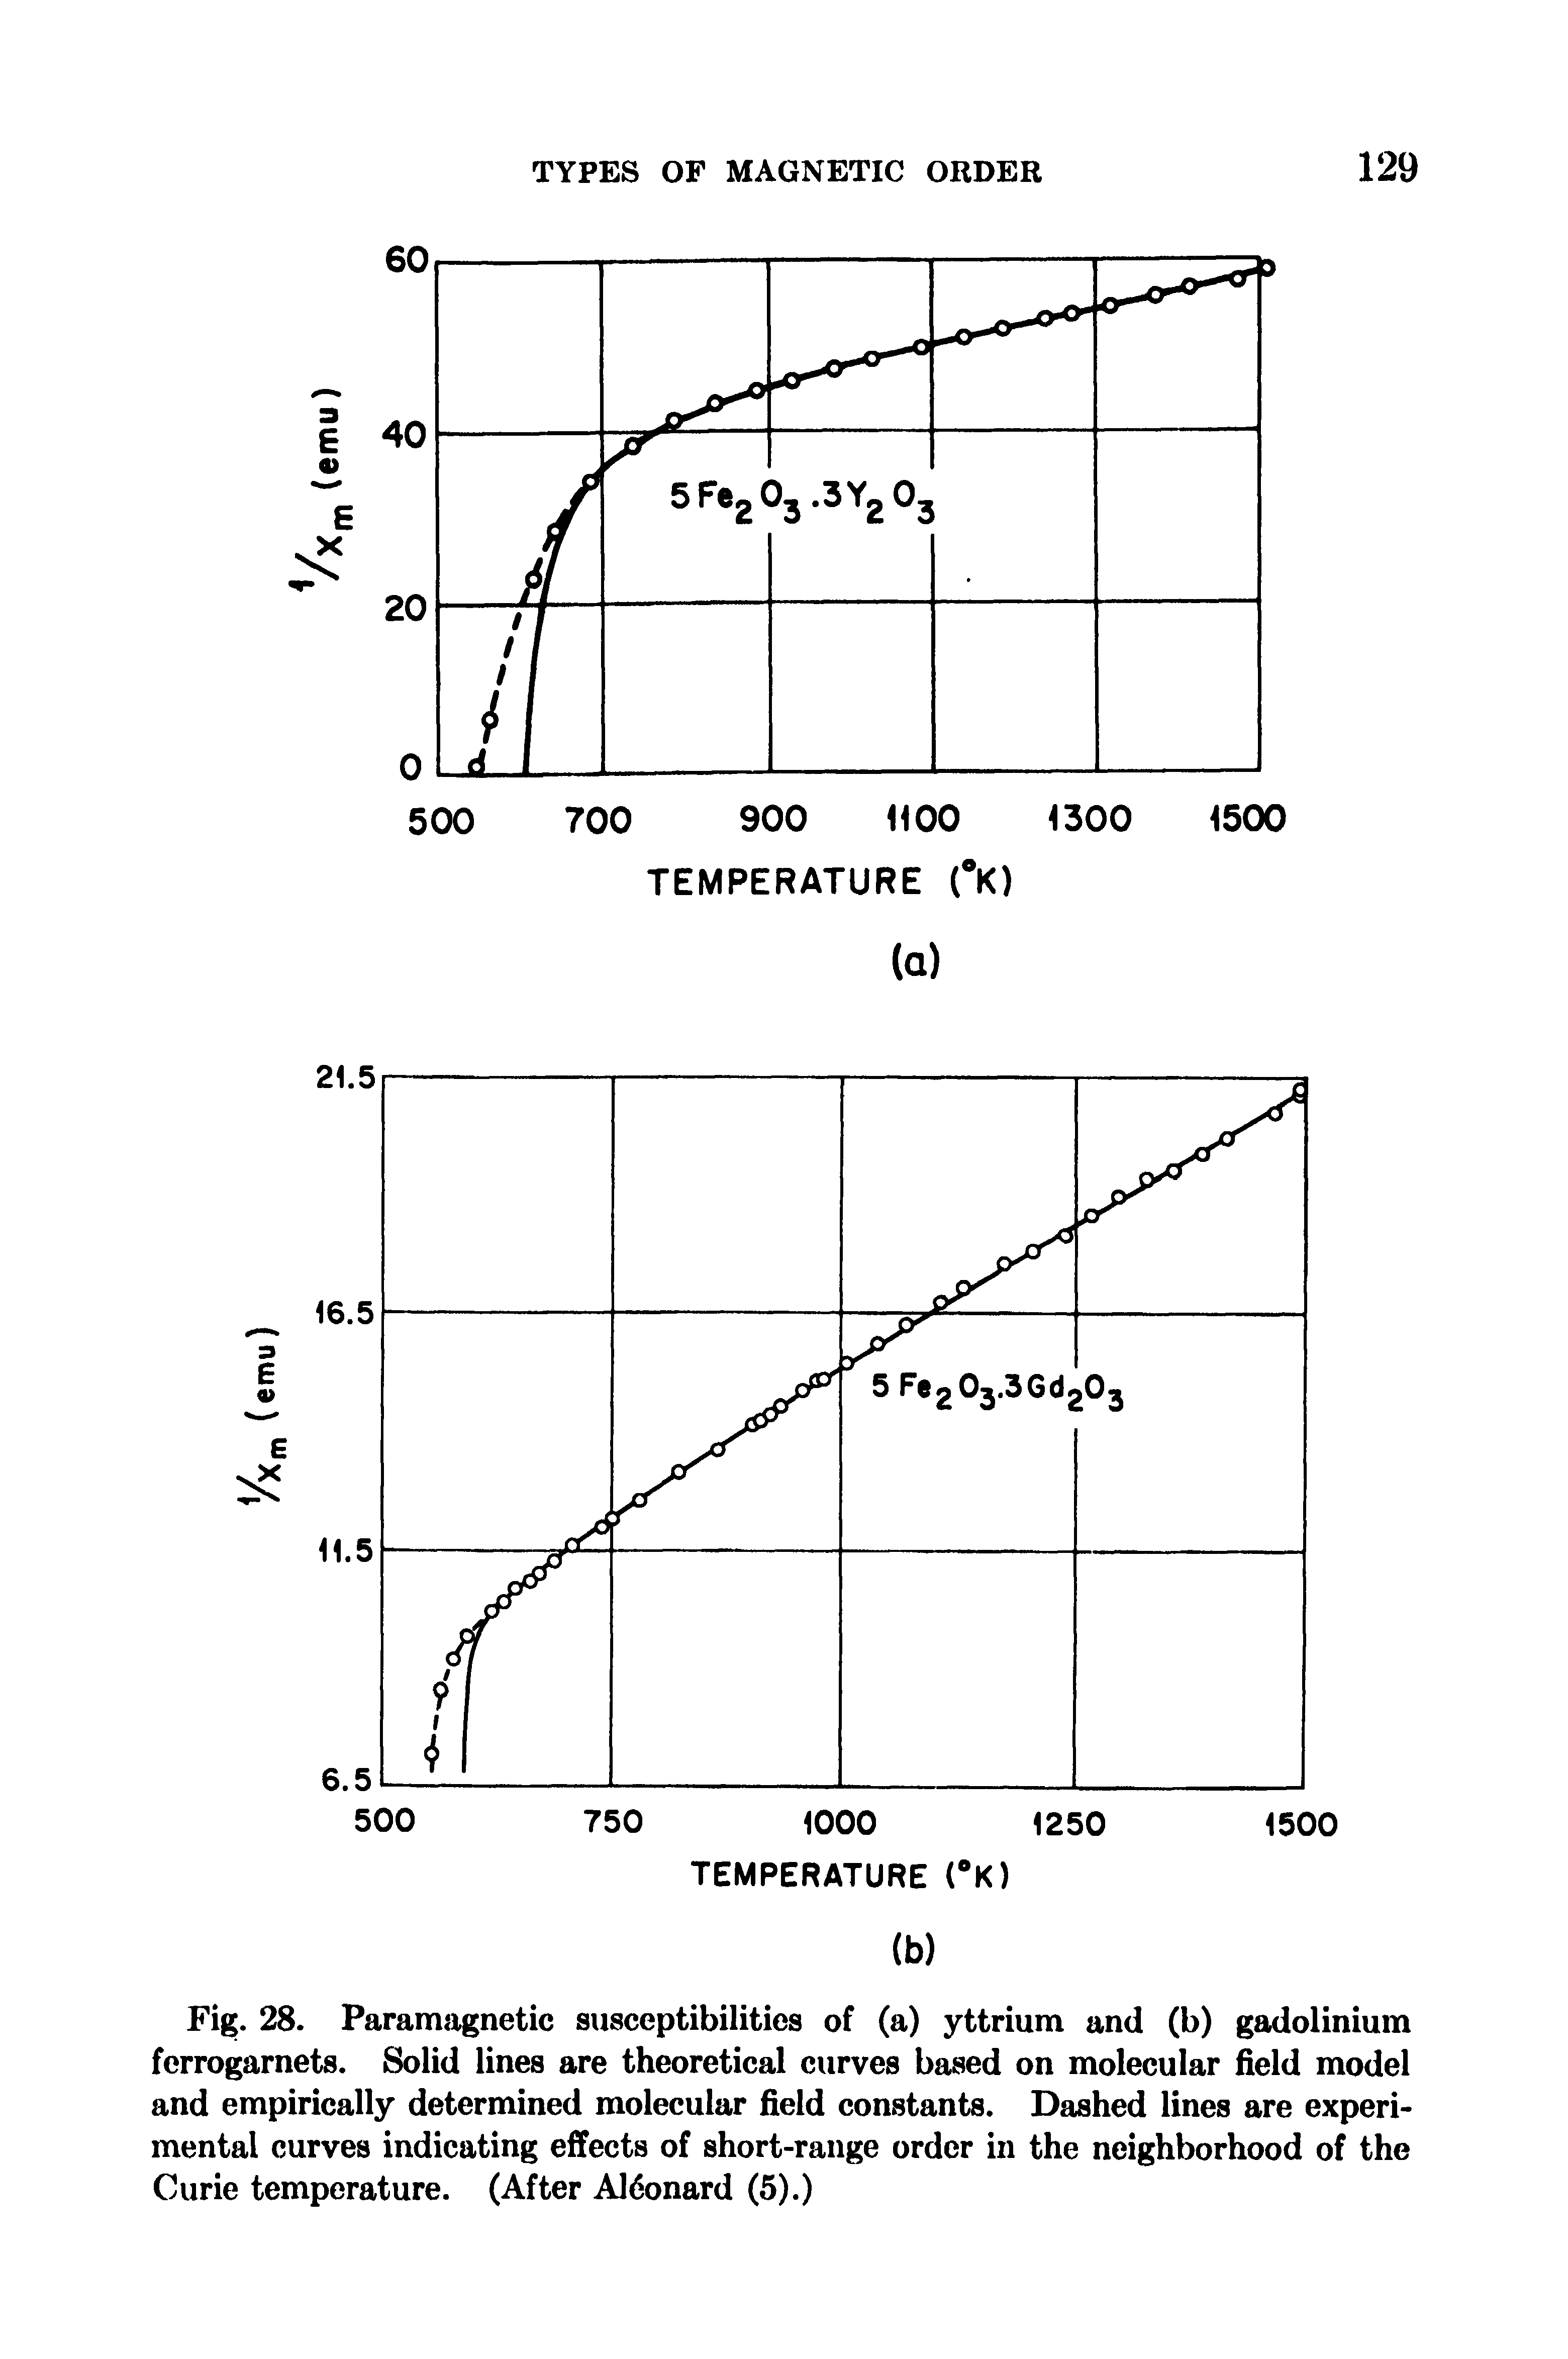 Fig. 28. Paramagnetic susceptibilities of (a) yttrium and (b) gadolinium ferrogarnets. Solid lines are theoretical curves based on molecular field model and empirically determined molecular field constants. Dashed lines are experimental curves indicating effects of short-range order in the neighborhood of the Curie temperature. (After A16onard (5).)...